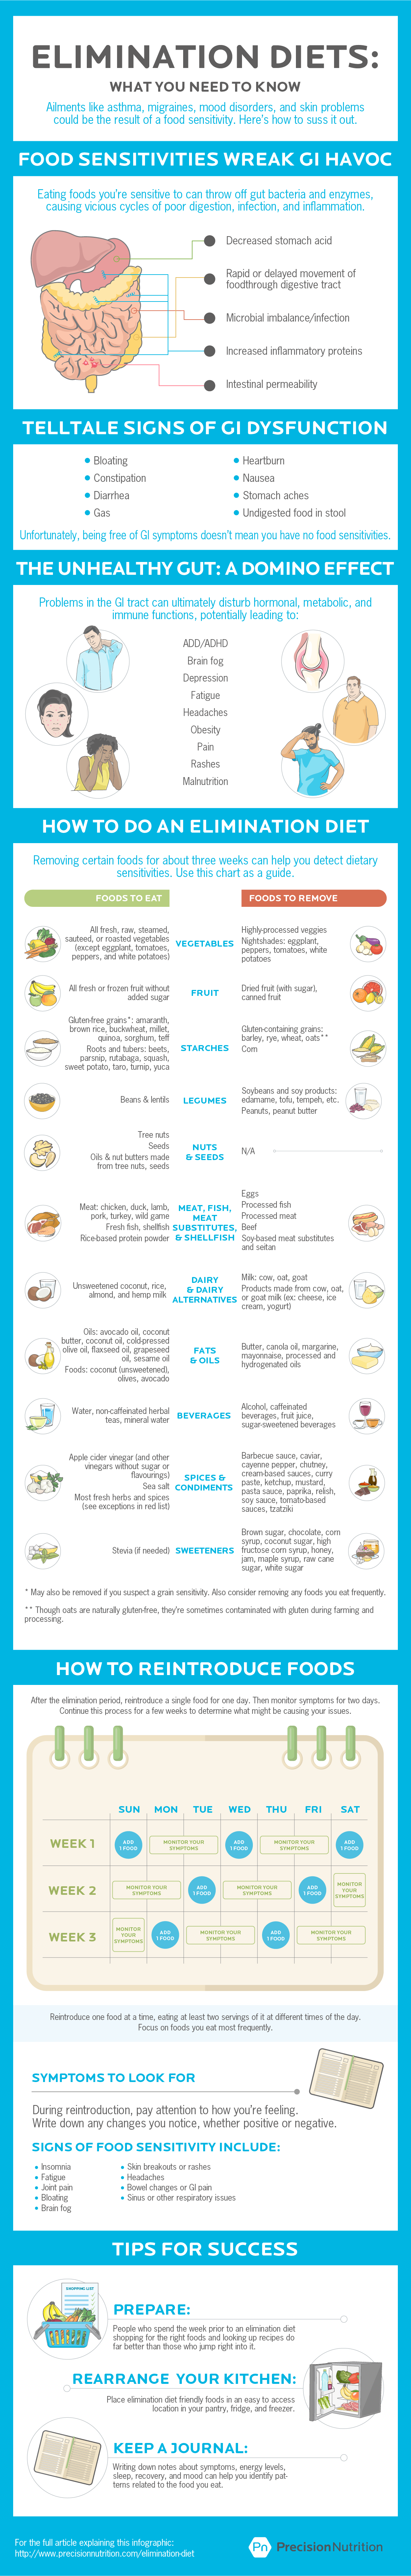 Elimination Diets Infographic Could Giving Up Certain 